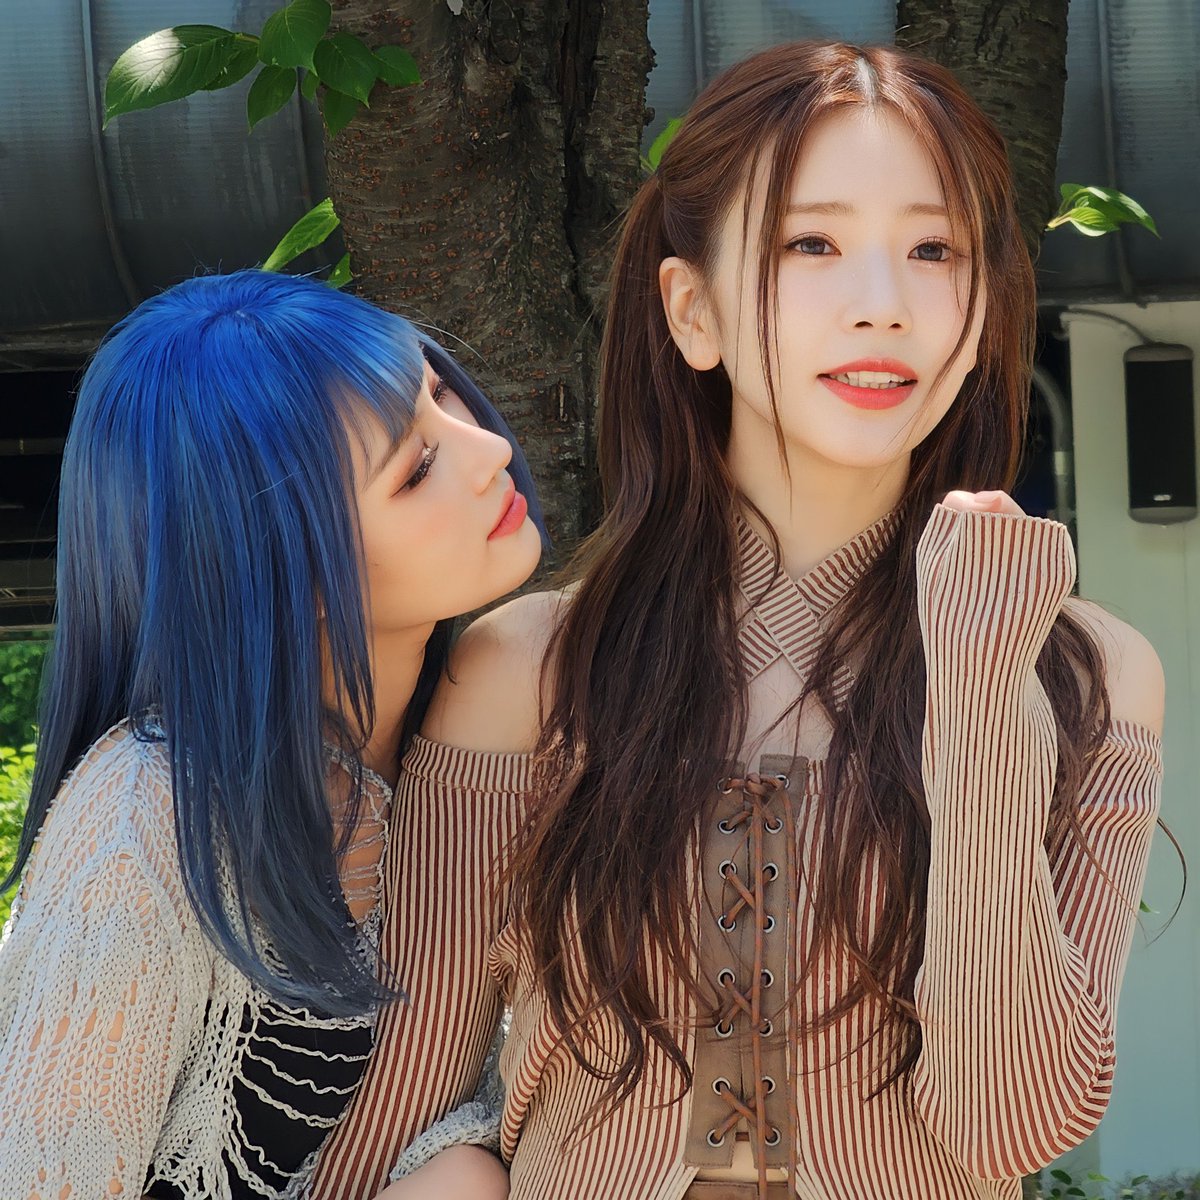 Find someone who looks at you the way Siyeon looks at Jiu